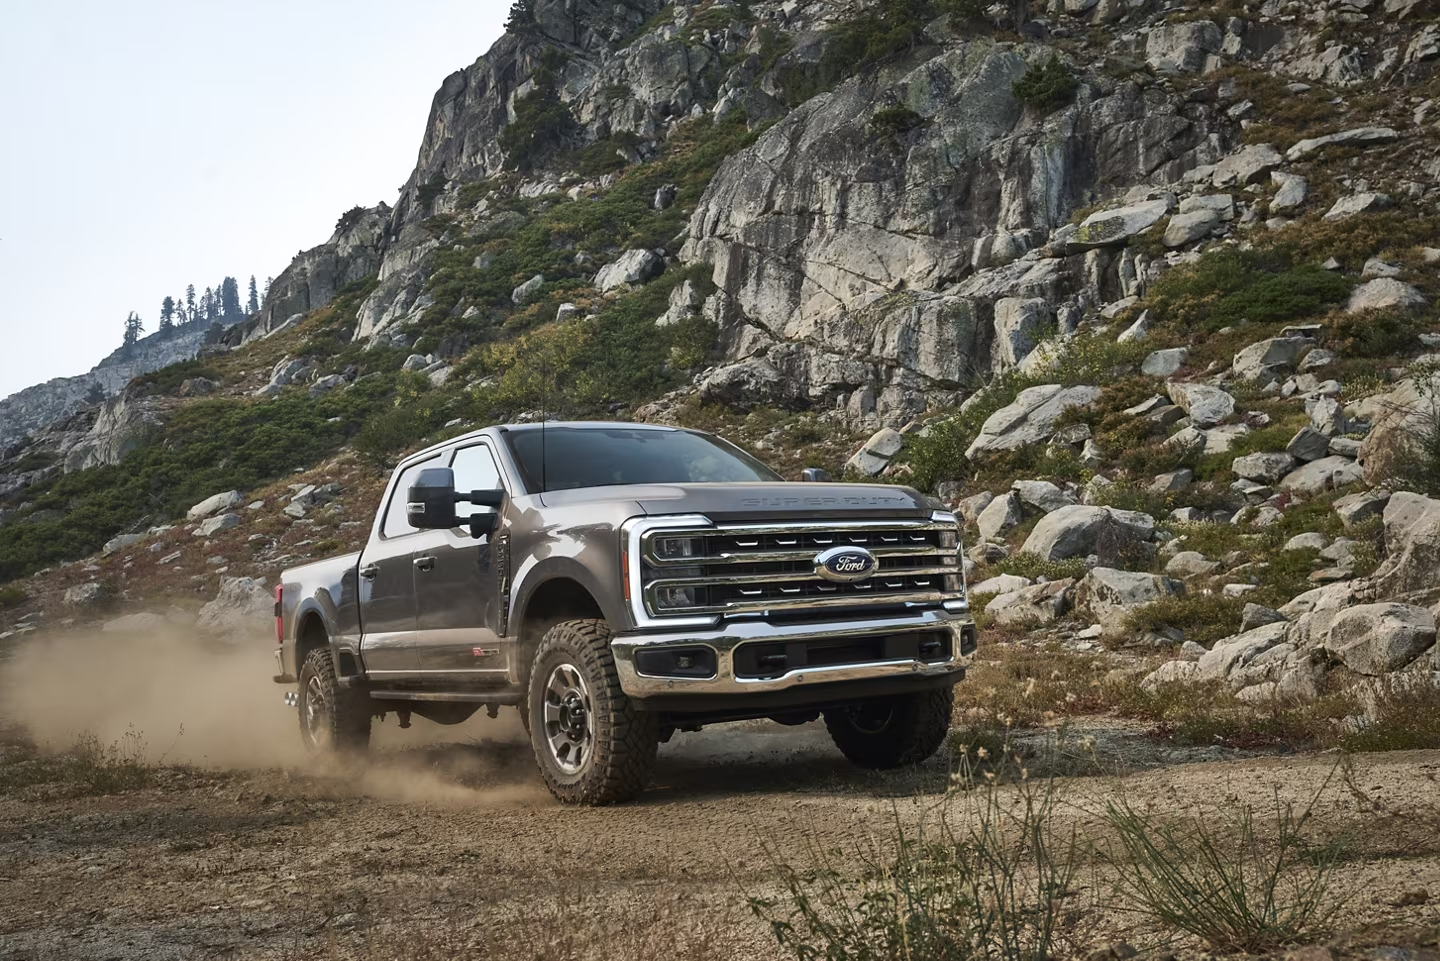 The Powerful New Ford Super Duty Truck climbs steep, rocky terrain with ease